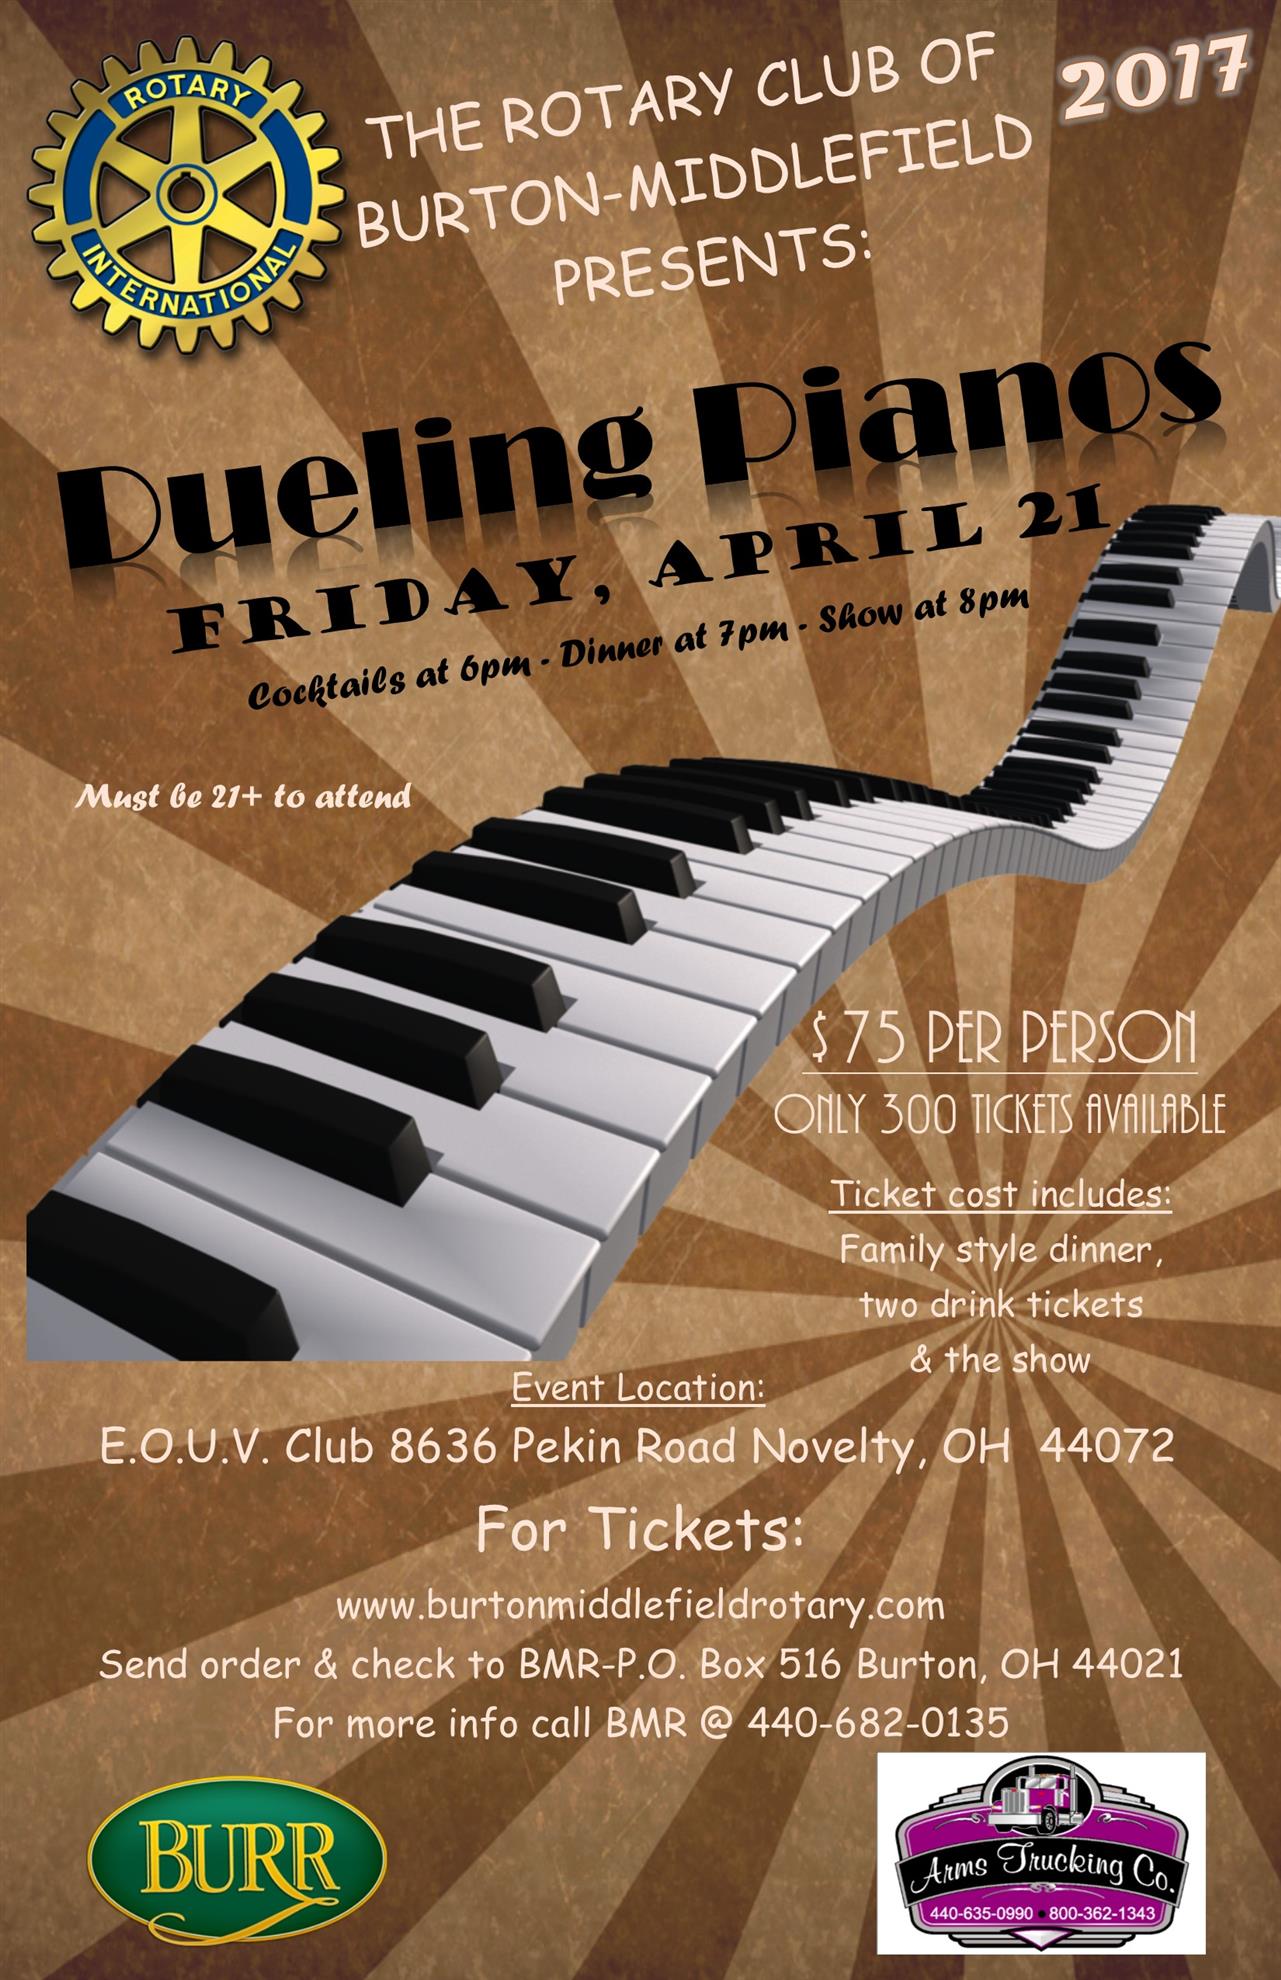 2017 BMR Dueling Piano Night Fundraiser/Good Time | Rotary Club of ...